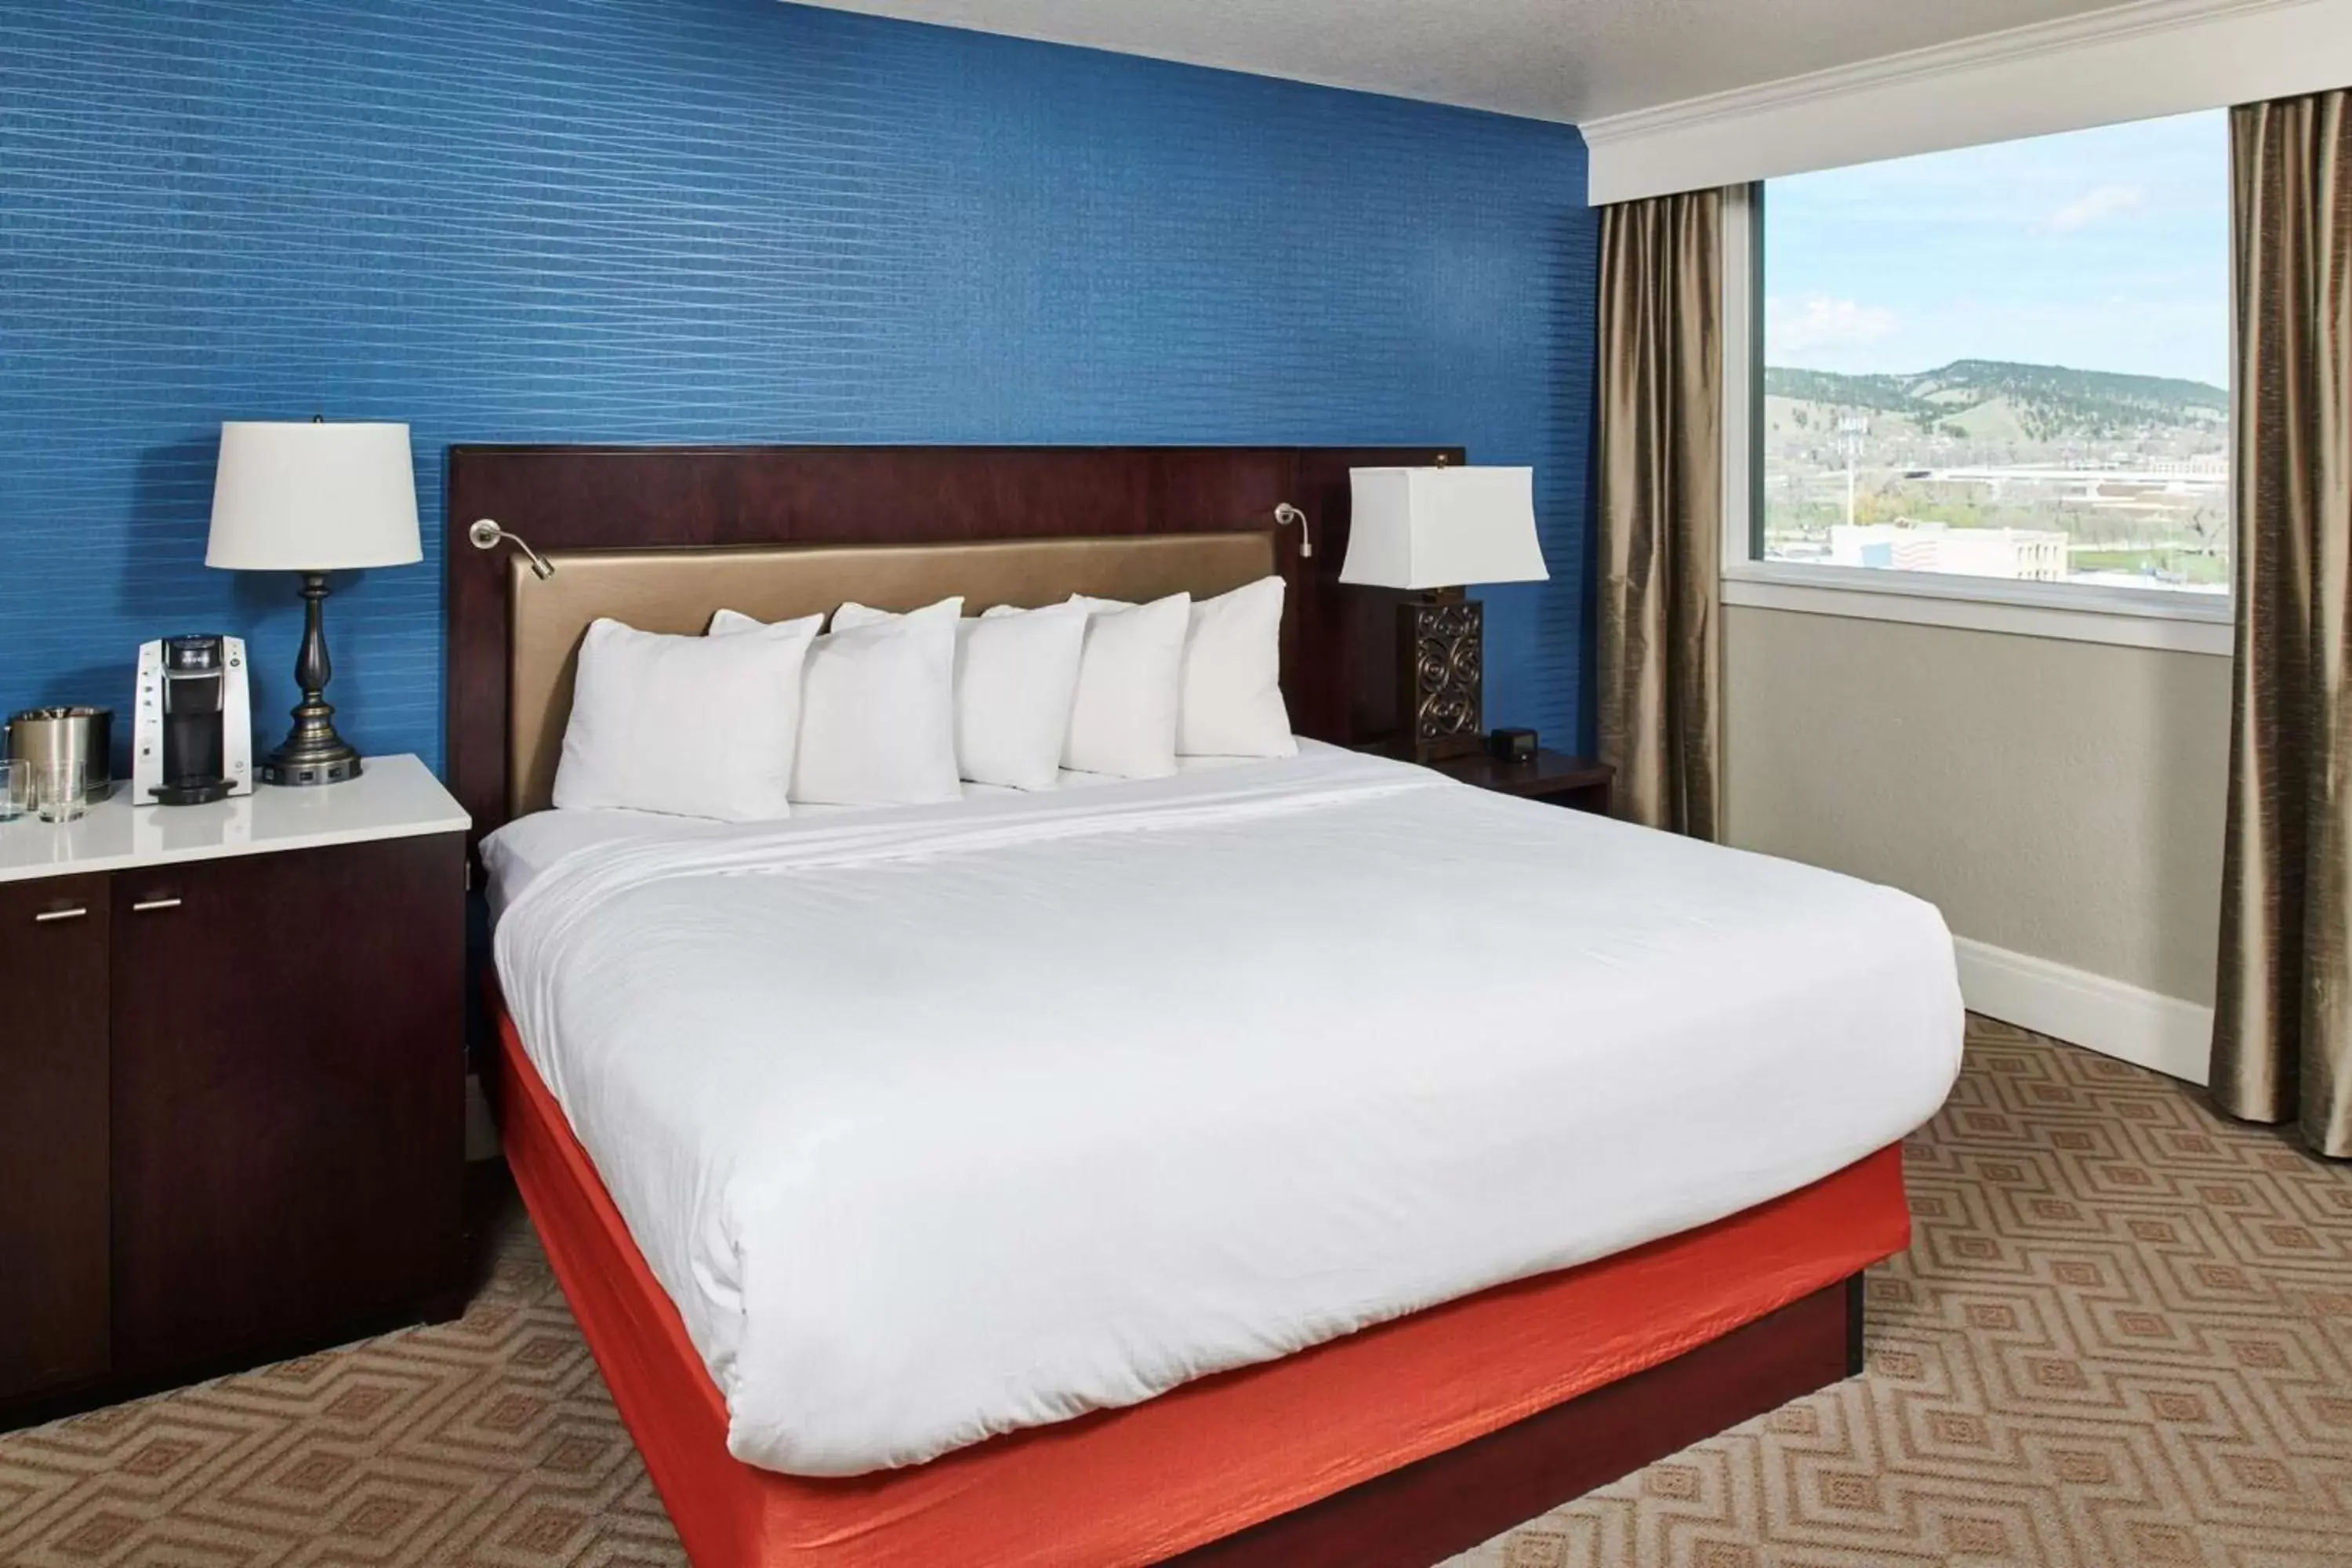 Bed in Hotel Alex Johnson Rapid City, Curio Collection by Hilton